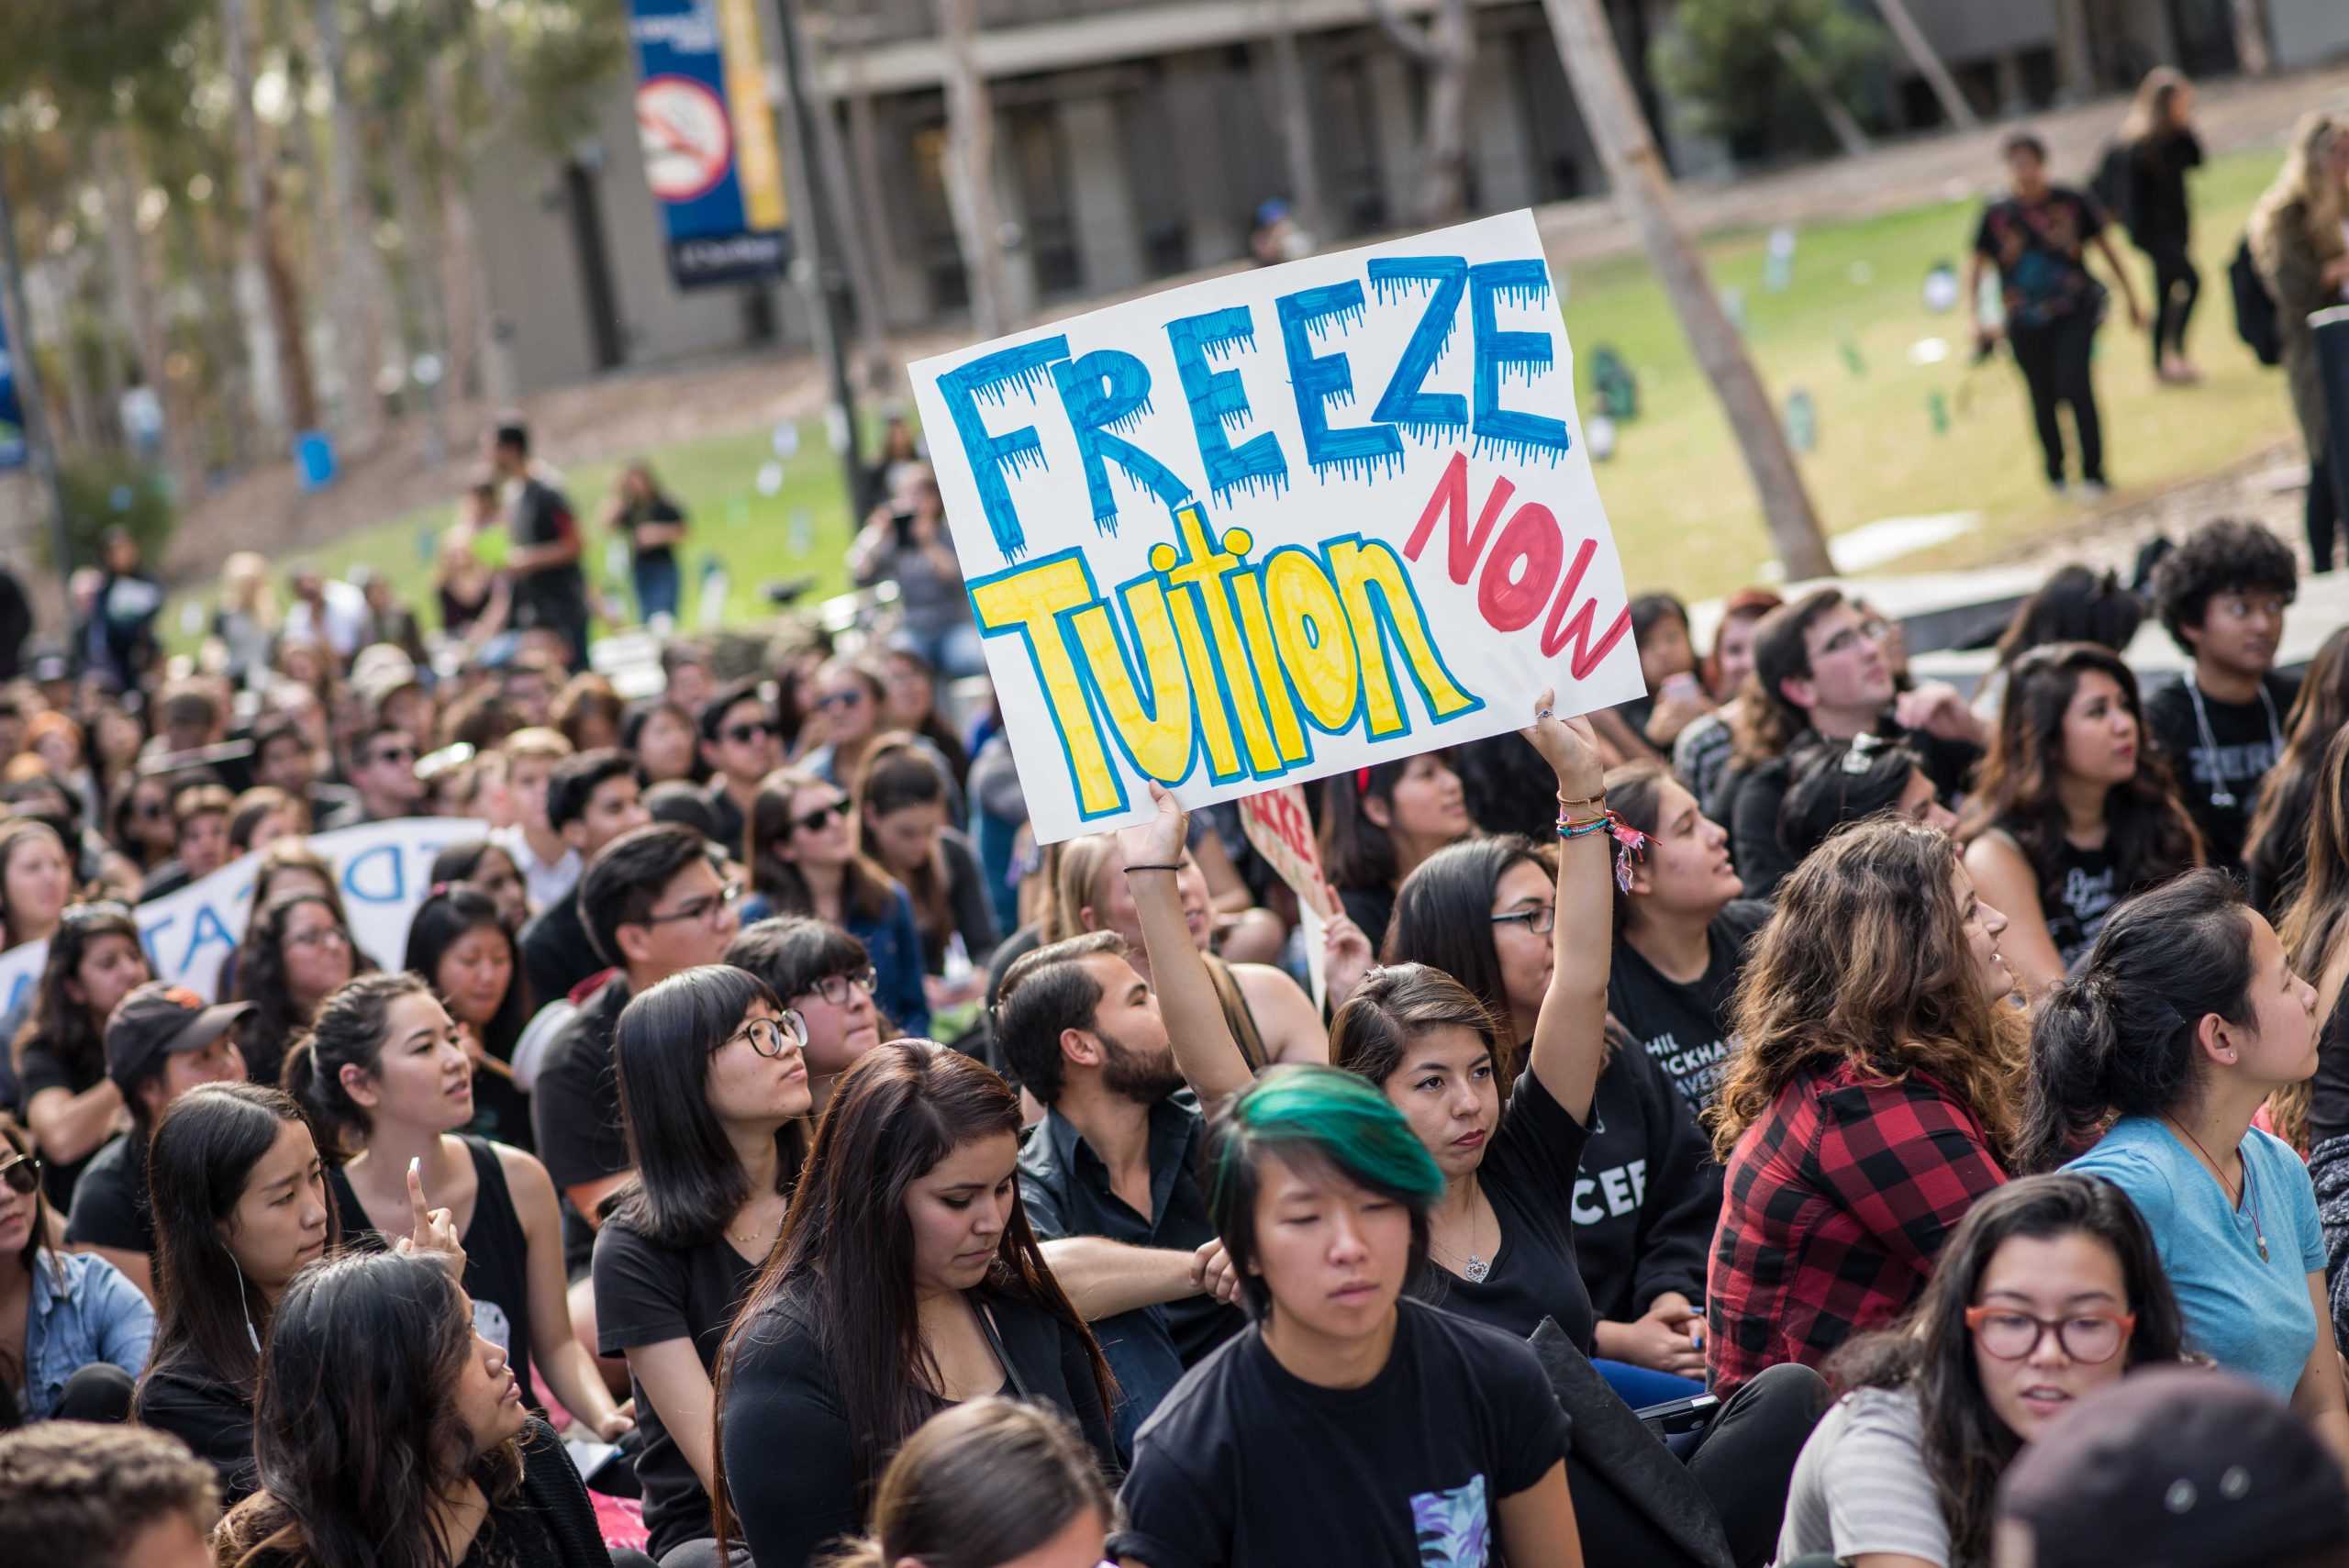 Students protest tuition in 2014 when the UC Regents were considering a 5% increase. | Photo by Cory Wong/Guardian